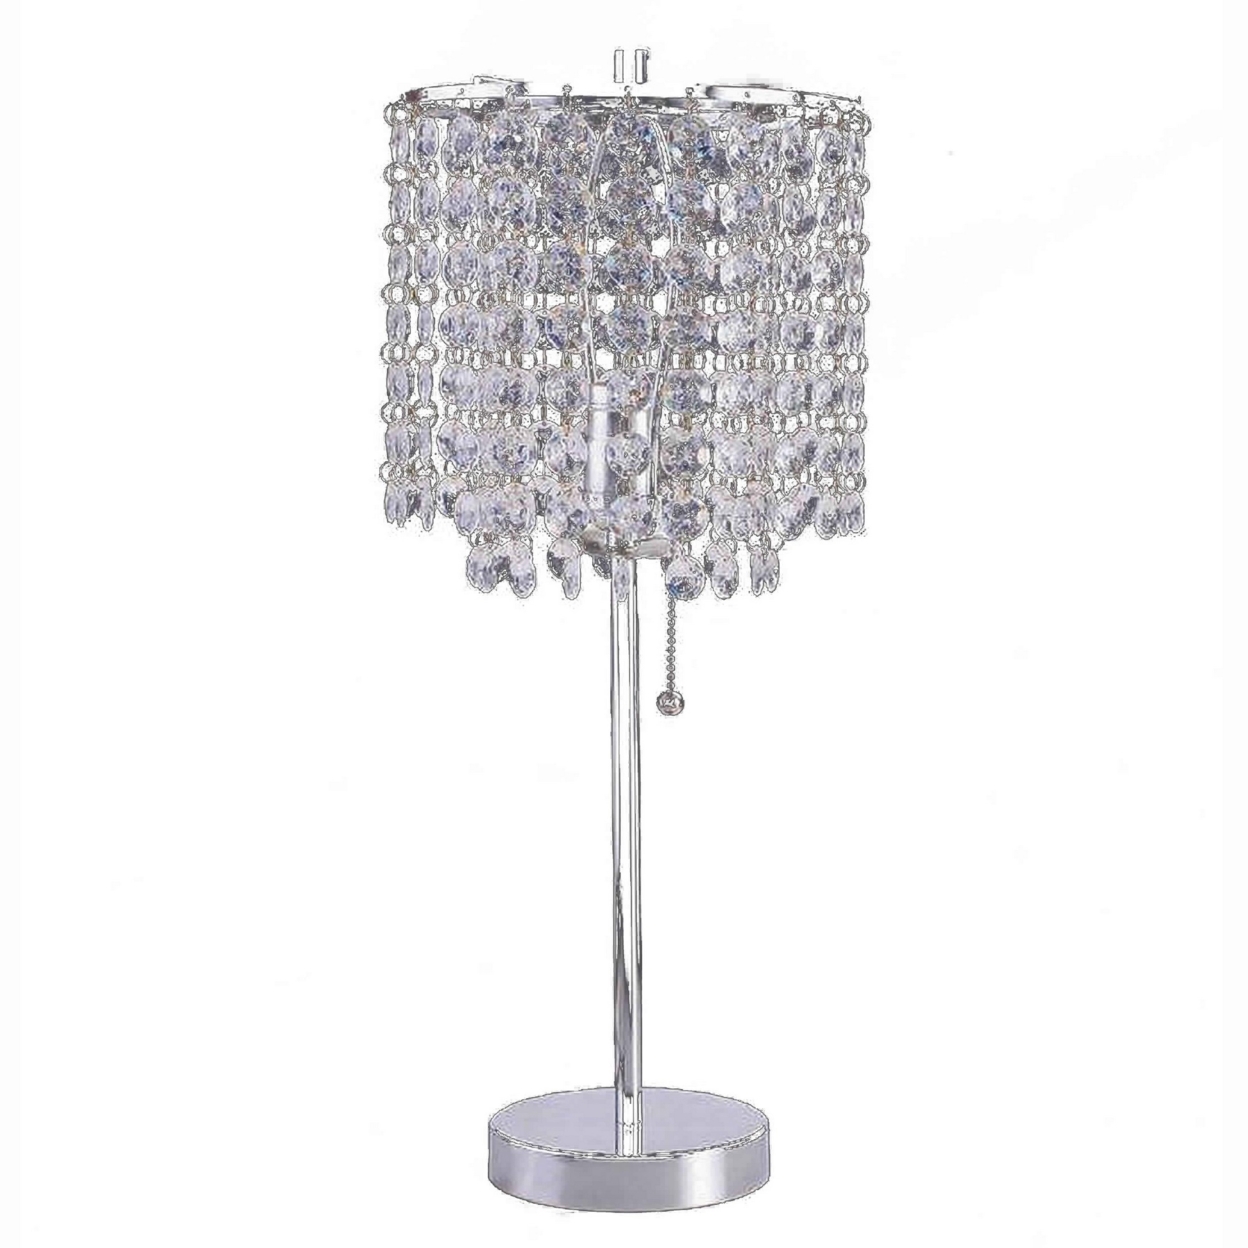 Chandelier Crystal Accented Table Lamp With Tubular Frame, Chrome And Clear- Saltoro Sherpi